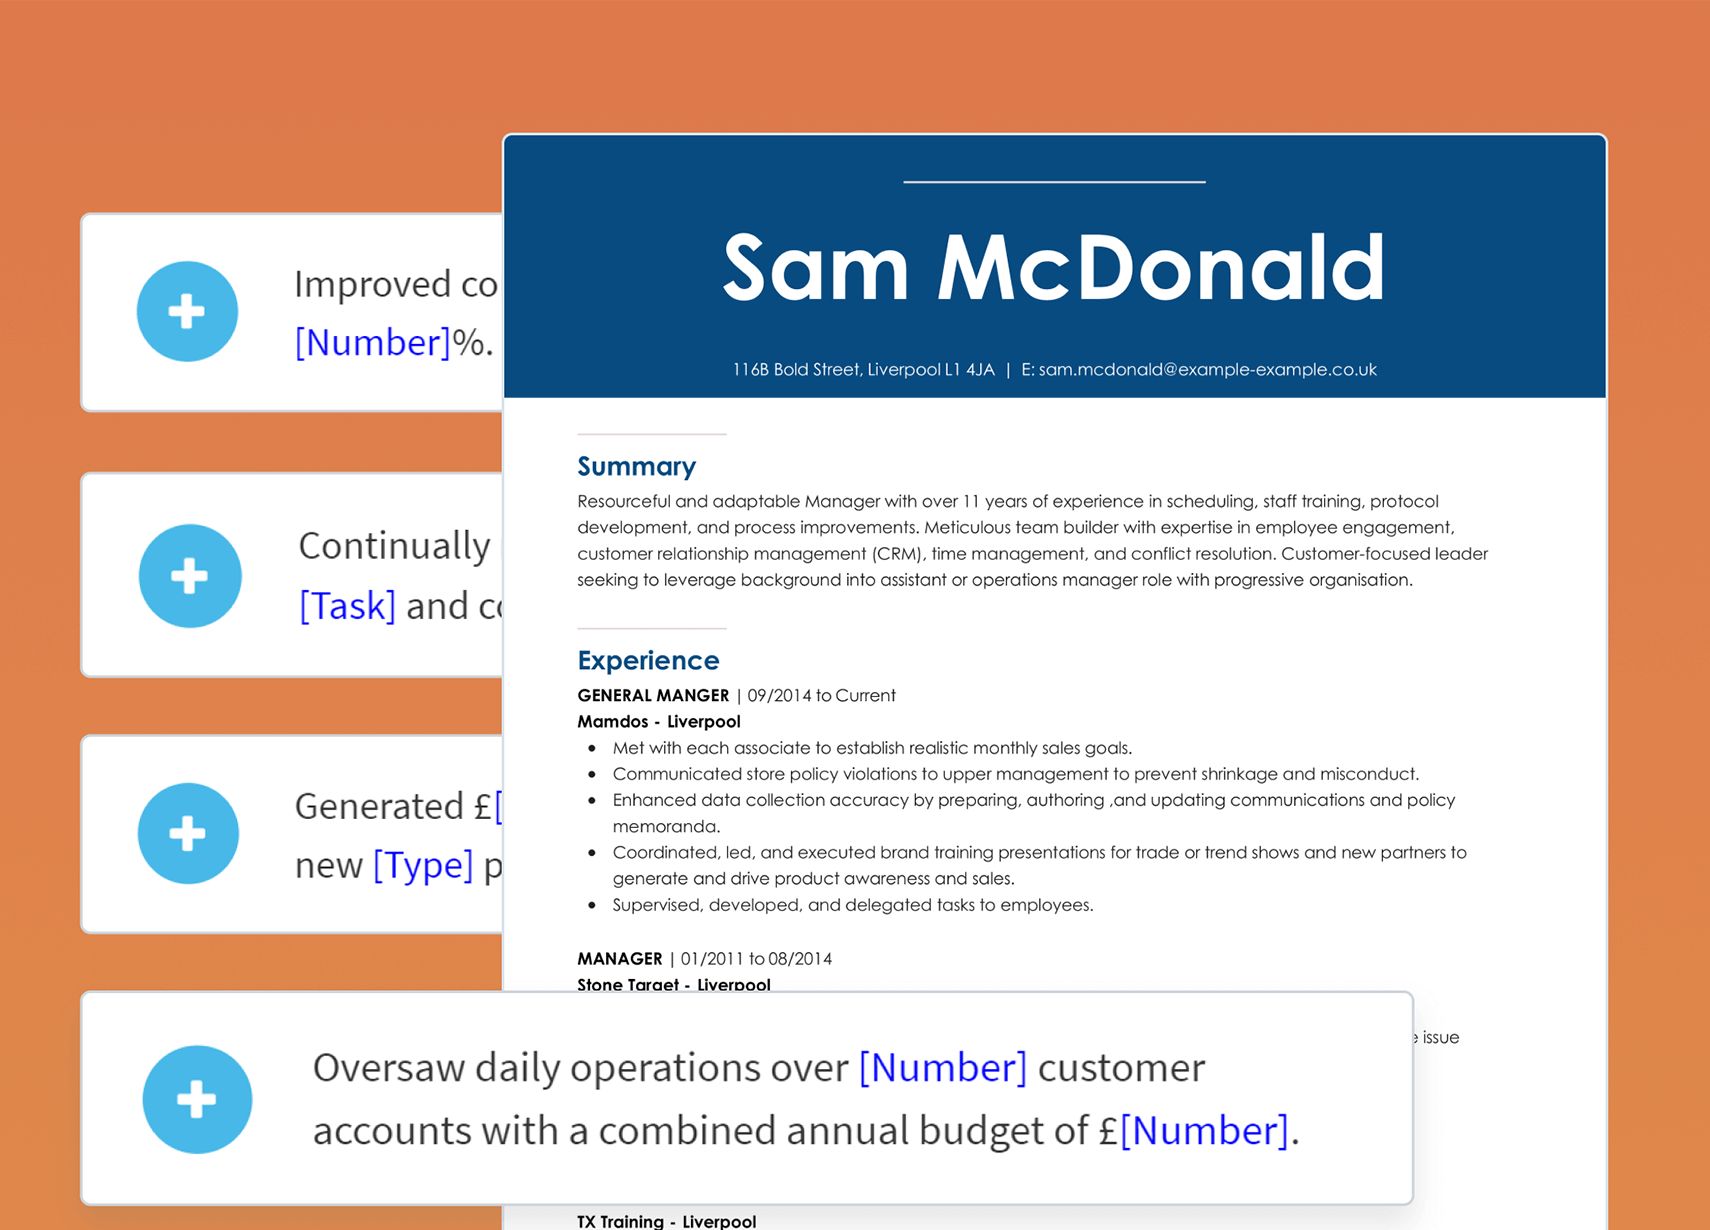 Easy-to-use CV builder